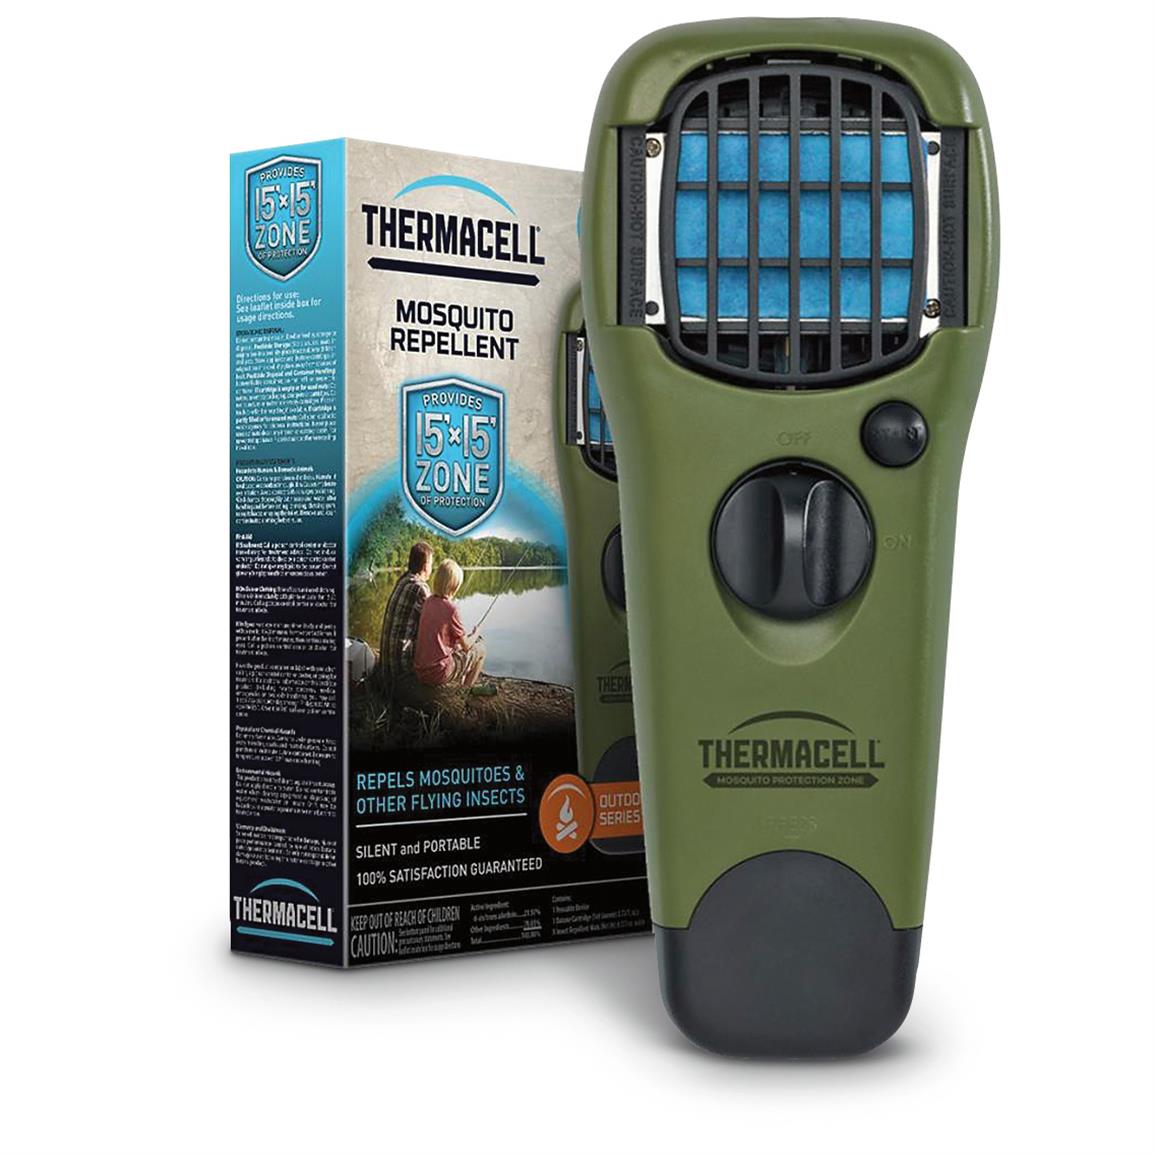 thermacell-mosquito-repellent-appliance-126219-pest-control-at